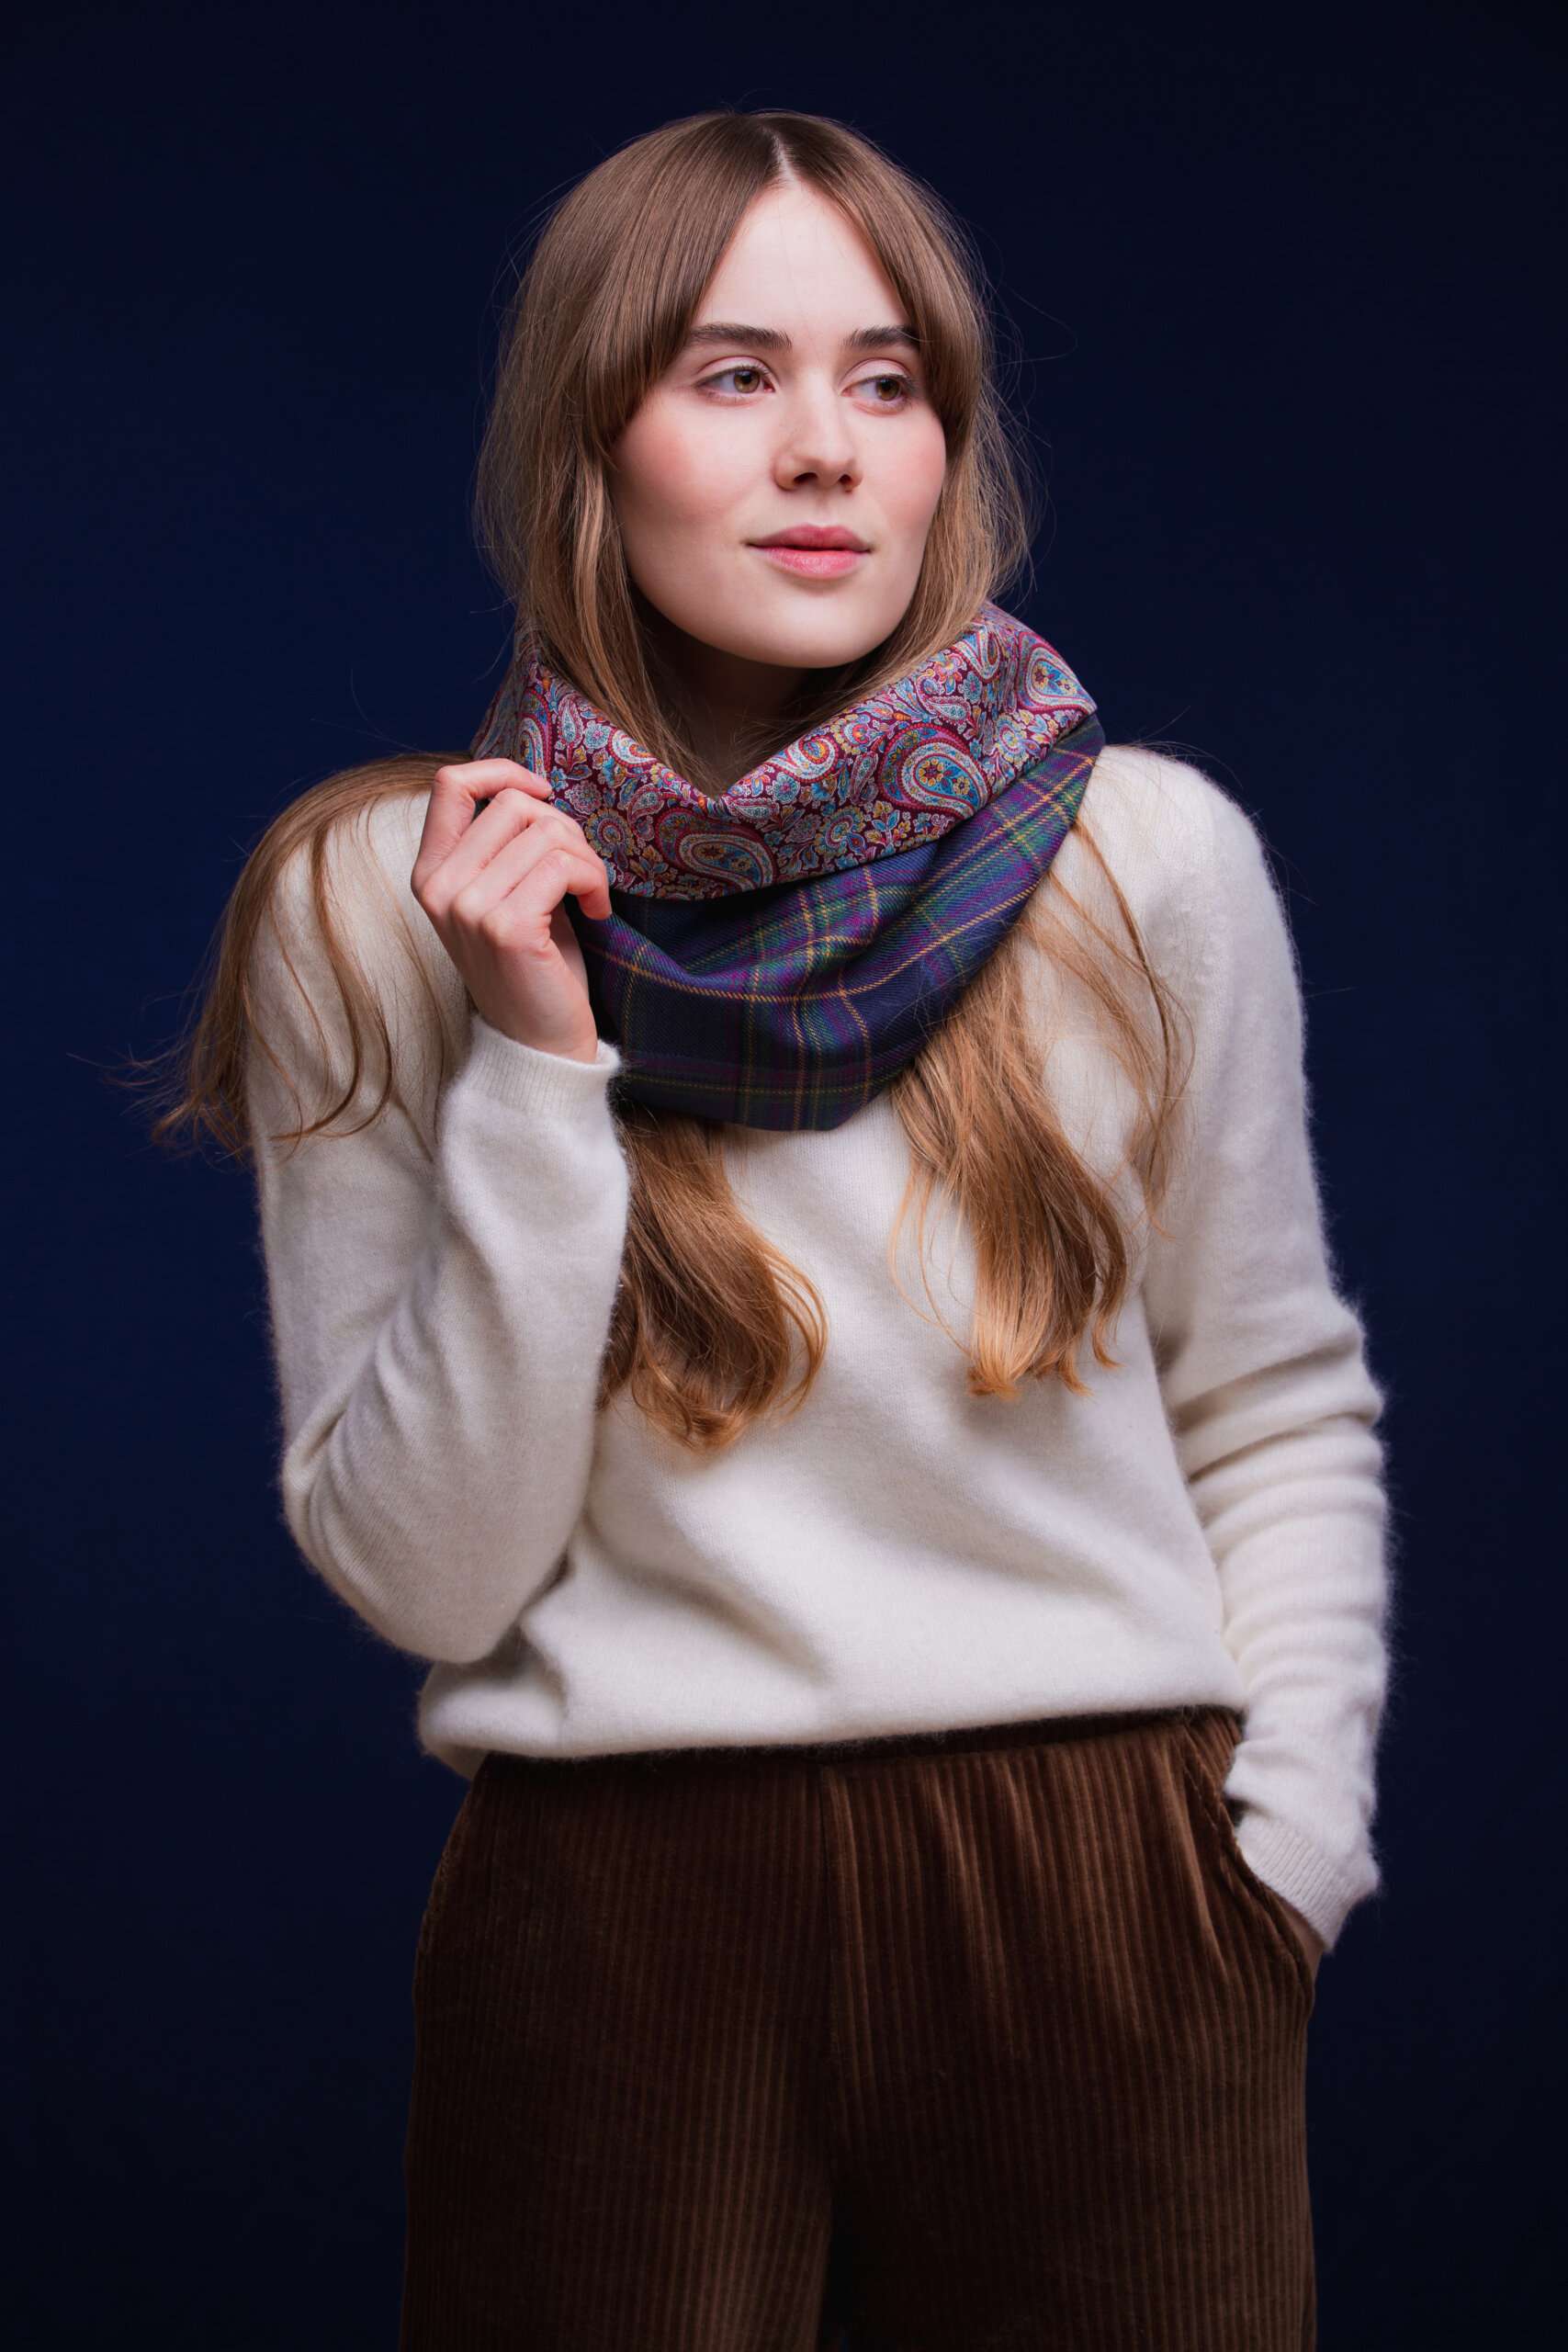 LoullyMakes Studio 4 55 scaled Classic Cowl in our exclusive Highland Mist Tartan with Liberty Print tana lawn cotton lining. Simply select your choice of coloured lining from the drop-down menu. (The example cowl pictured here features lining 7) This easy-to-wear cowl combines effortless styling and sublime warmth, being formed from a simple superfine cotton lined "tube" of 100% wool Highland Mist Tartan. Simply pop over your head and wear the cowl high, to keep out the chill, or roll over the neckline to feature a flourish of an iconic art fabric. 100% Wool Tartan, 100% cotton lining